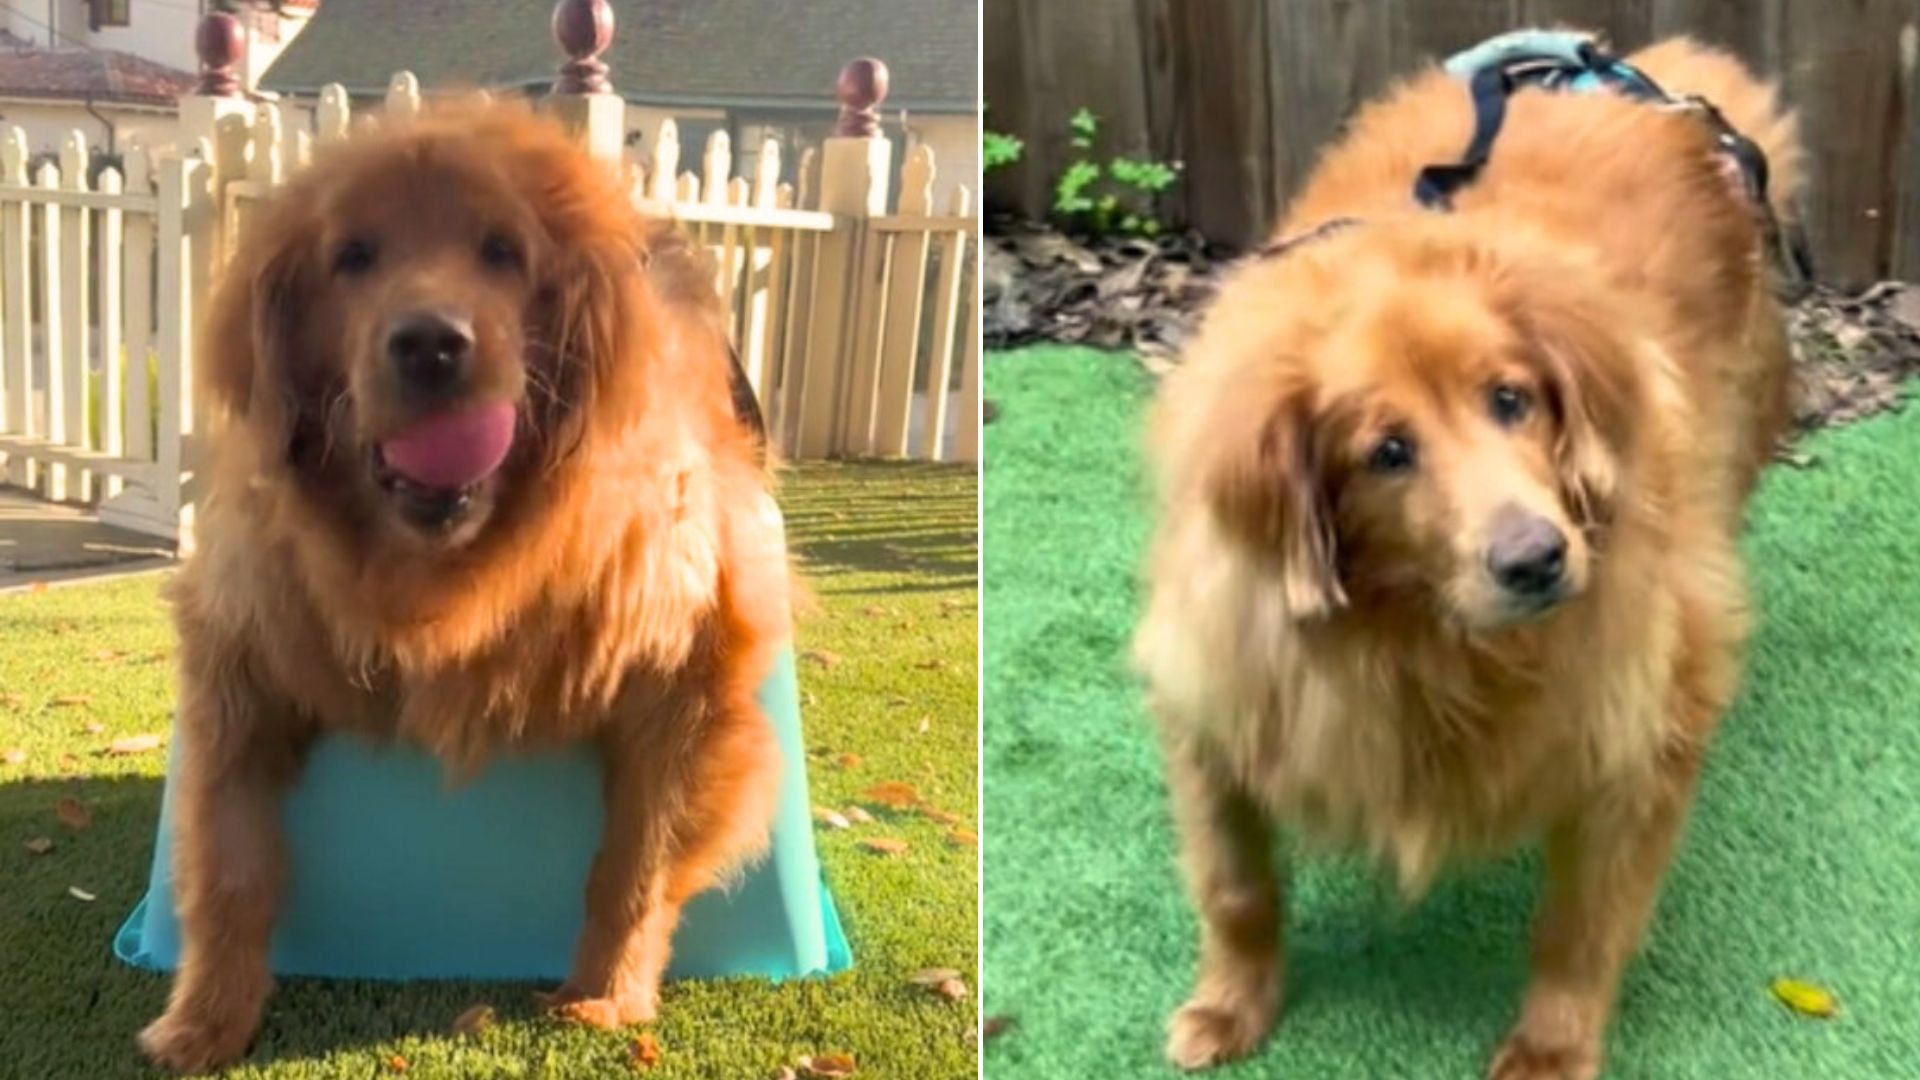 Owners Wanted To Euthanize Their Goldie For Being Overweight, Now She’s A Brand New Dog